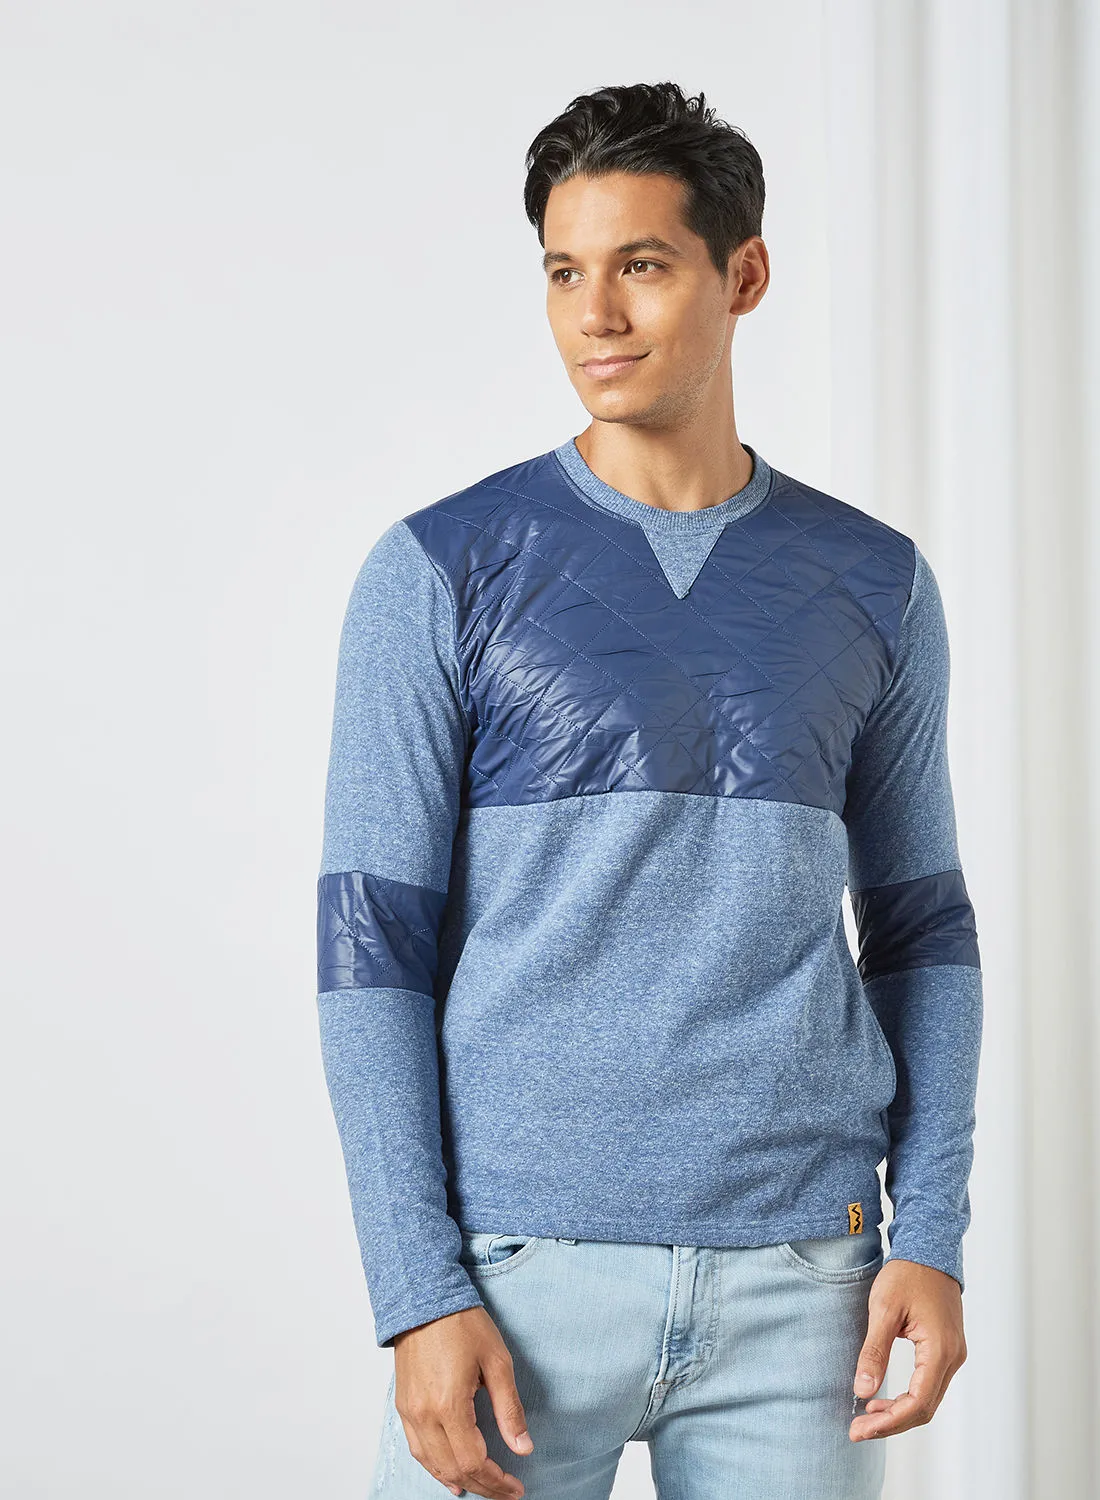 Campus Sutra Men's Casual Pullover Blue